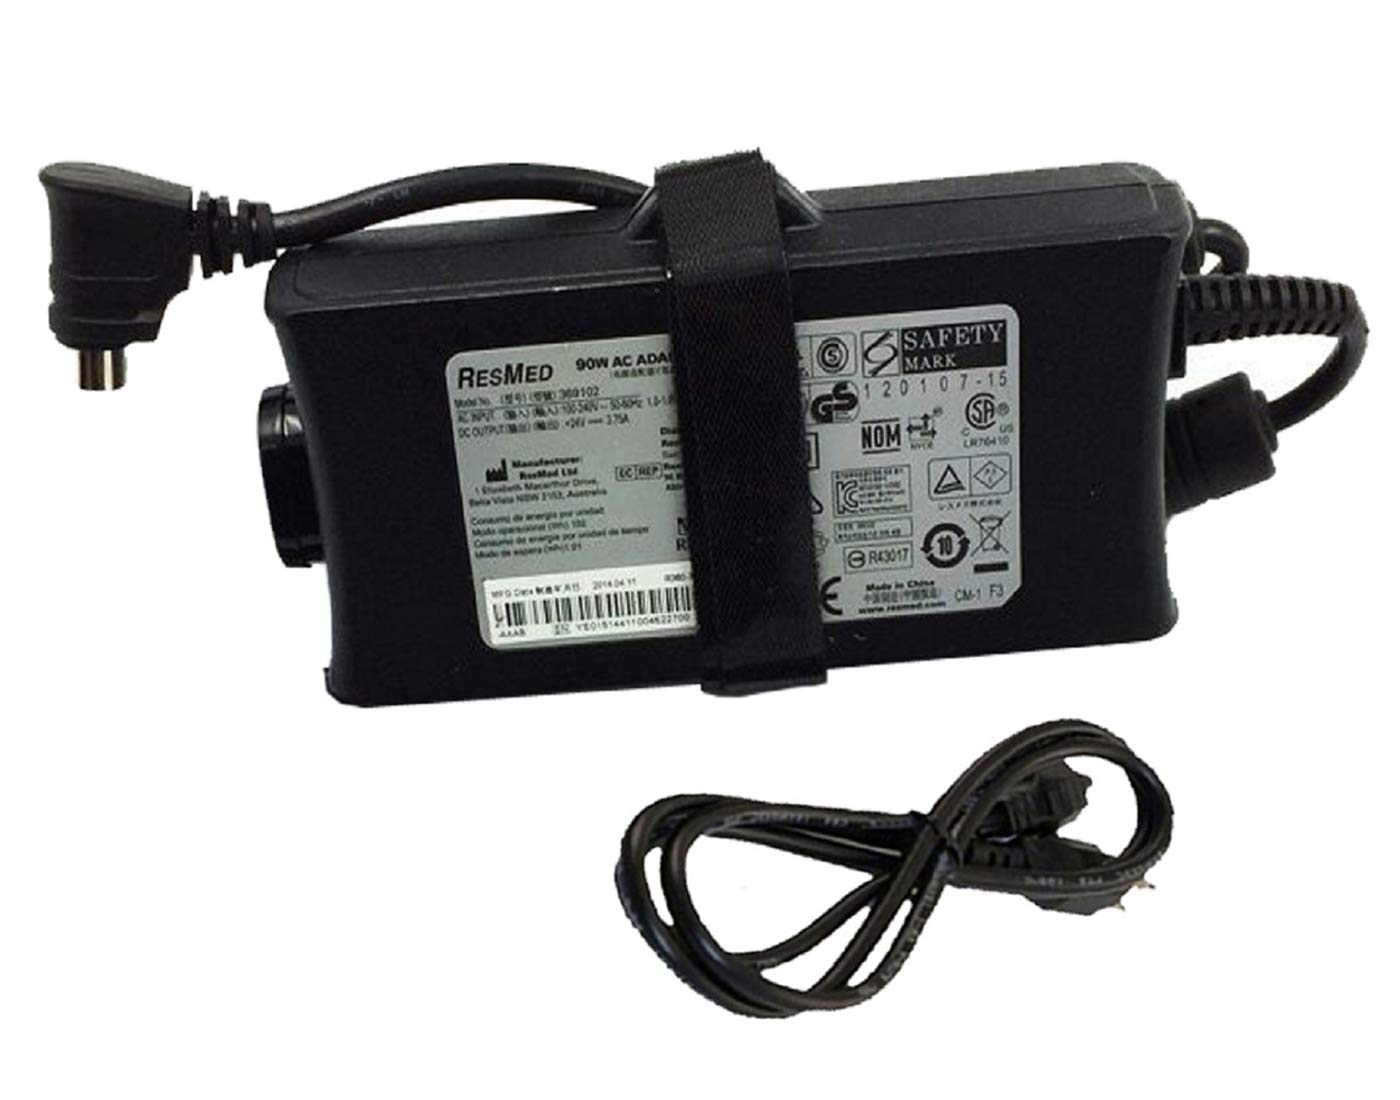 New ResMed 369102 24V 3.75A 90W AC ADAPTER FOR RESMED CPAP R360-7213